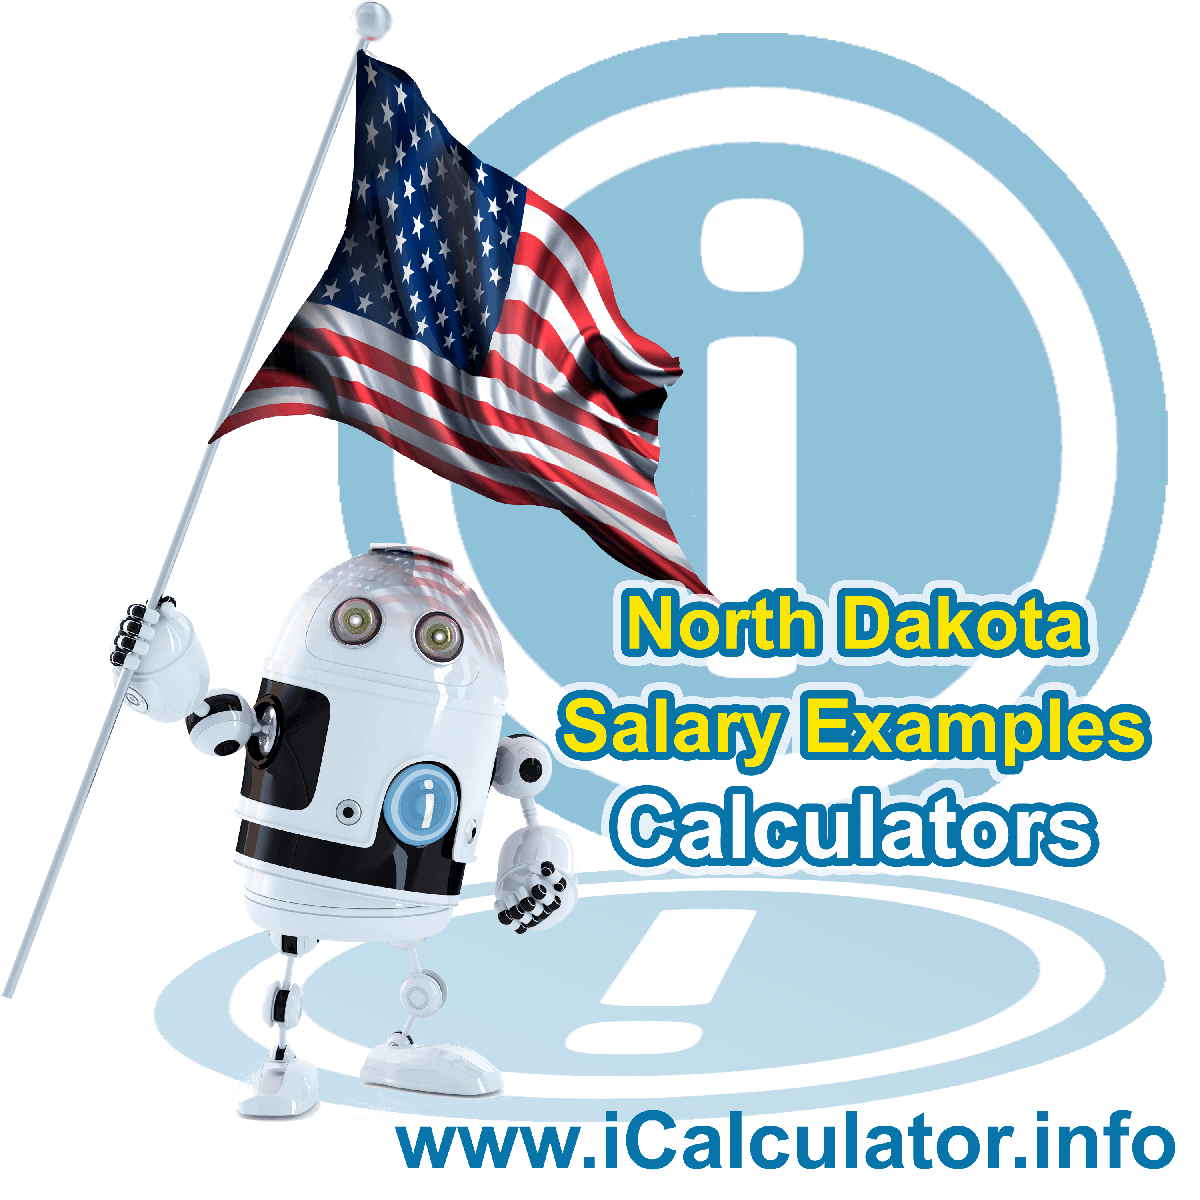 North Dakota Salary Example for $ 40,000.00 in 2023 | iCalculator™ | $ 40,000.00 salary example for employee and employer paying North Dakota State tincome taxes. Detailed salary after tax calculation including North Dakota State Tax, Federal State Tax, Medicare Deductions, Social Security, Capital Gains and other income tax and salary deductions complete with supporting North Dakota state tax tables 